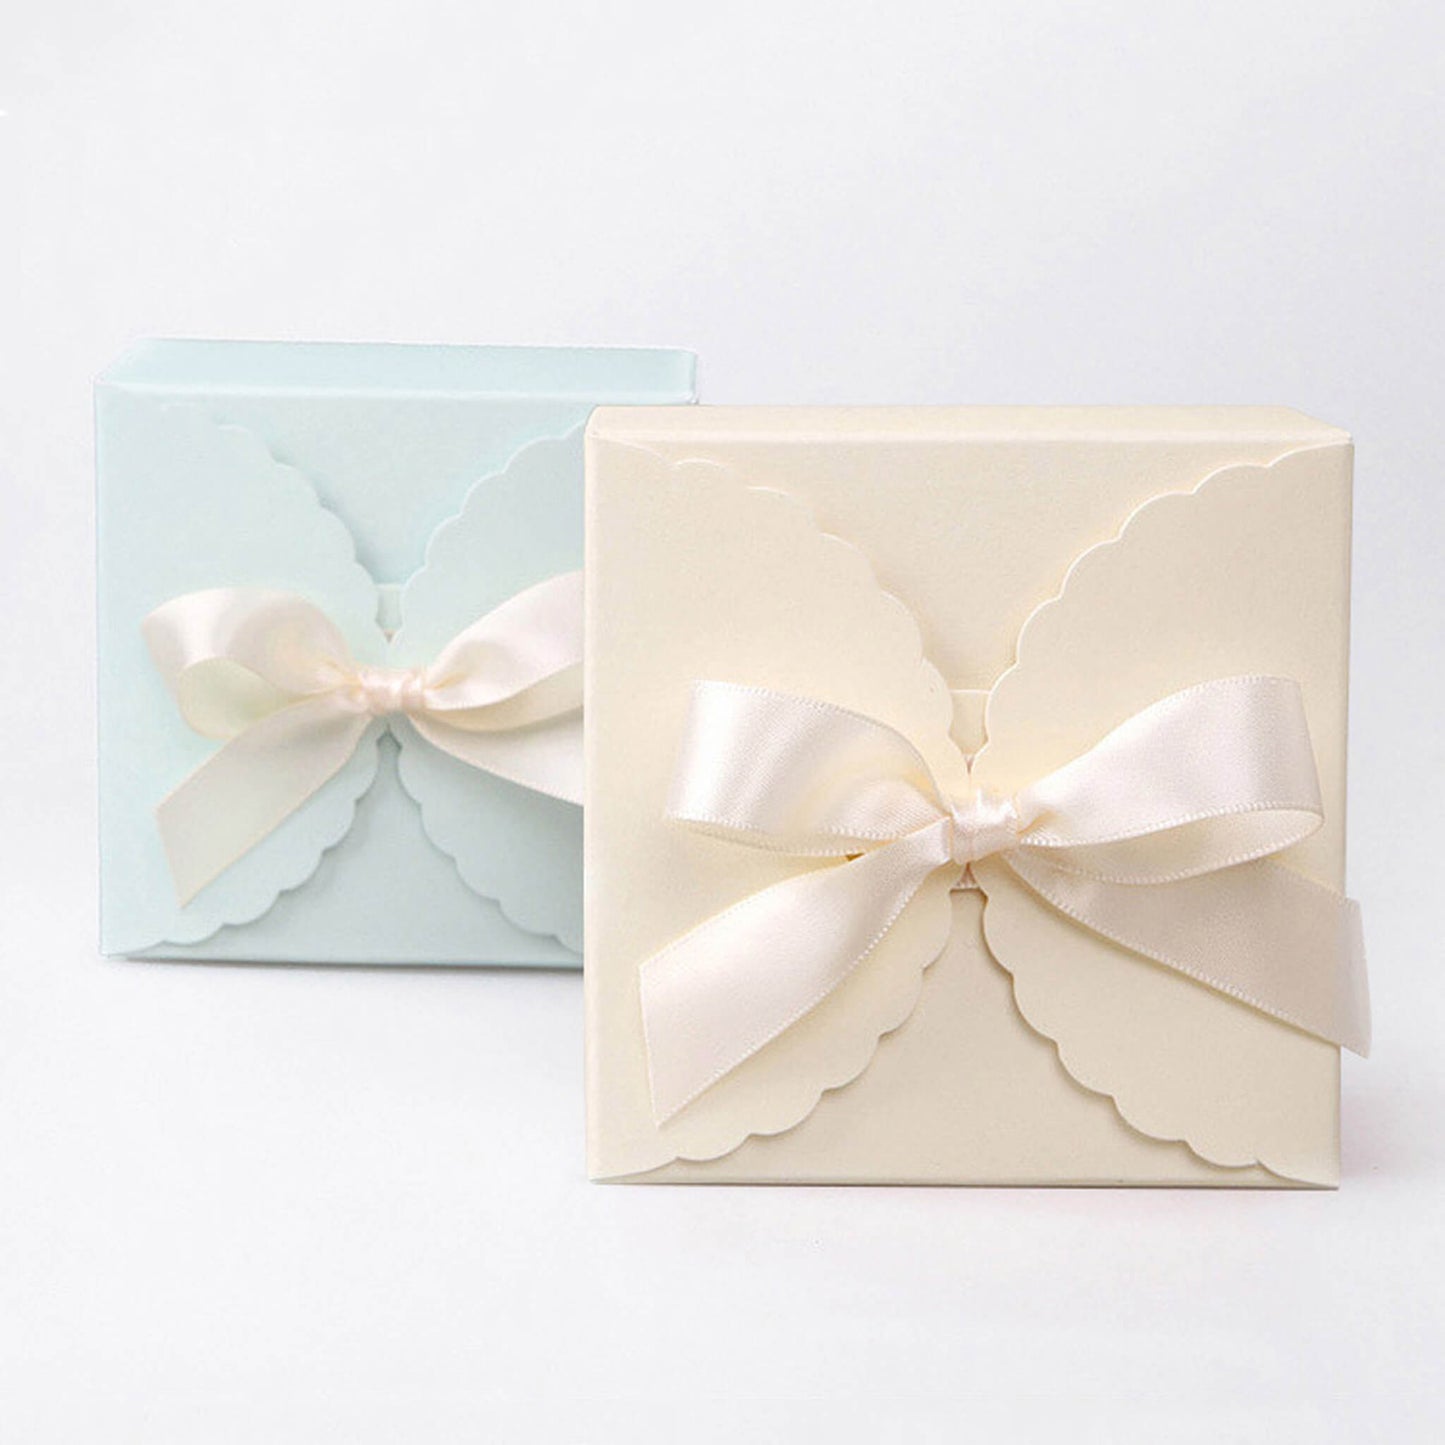 Baking candy handmade soap square gift paper box